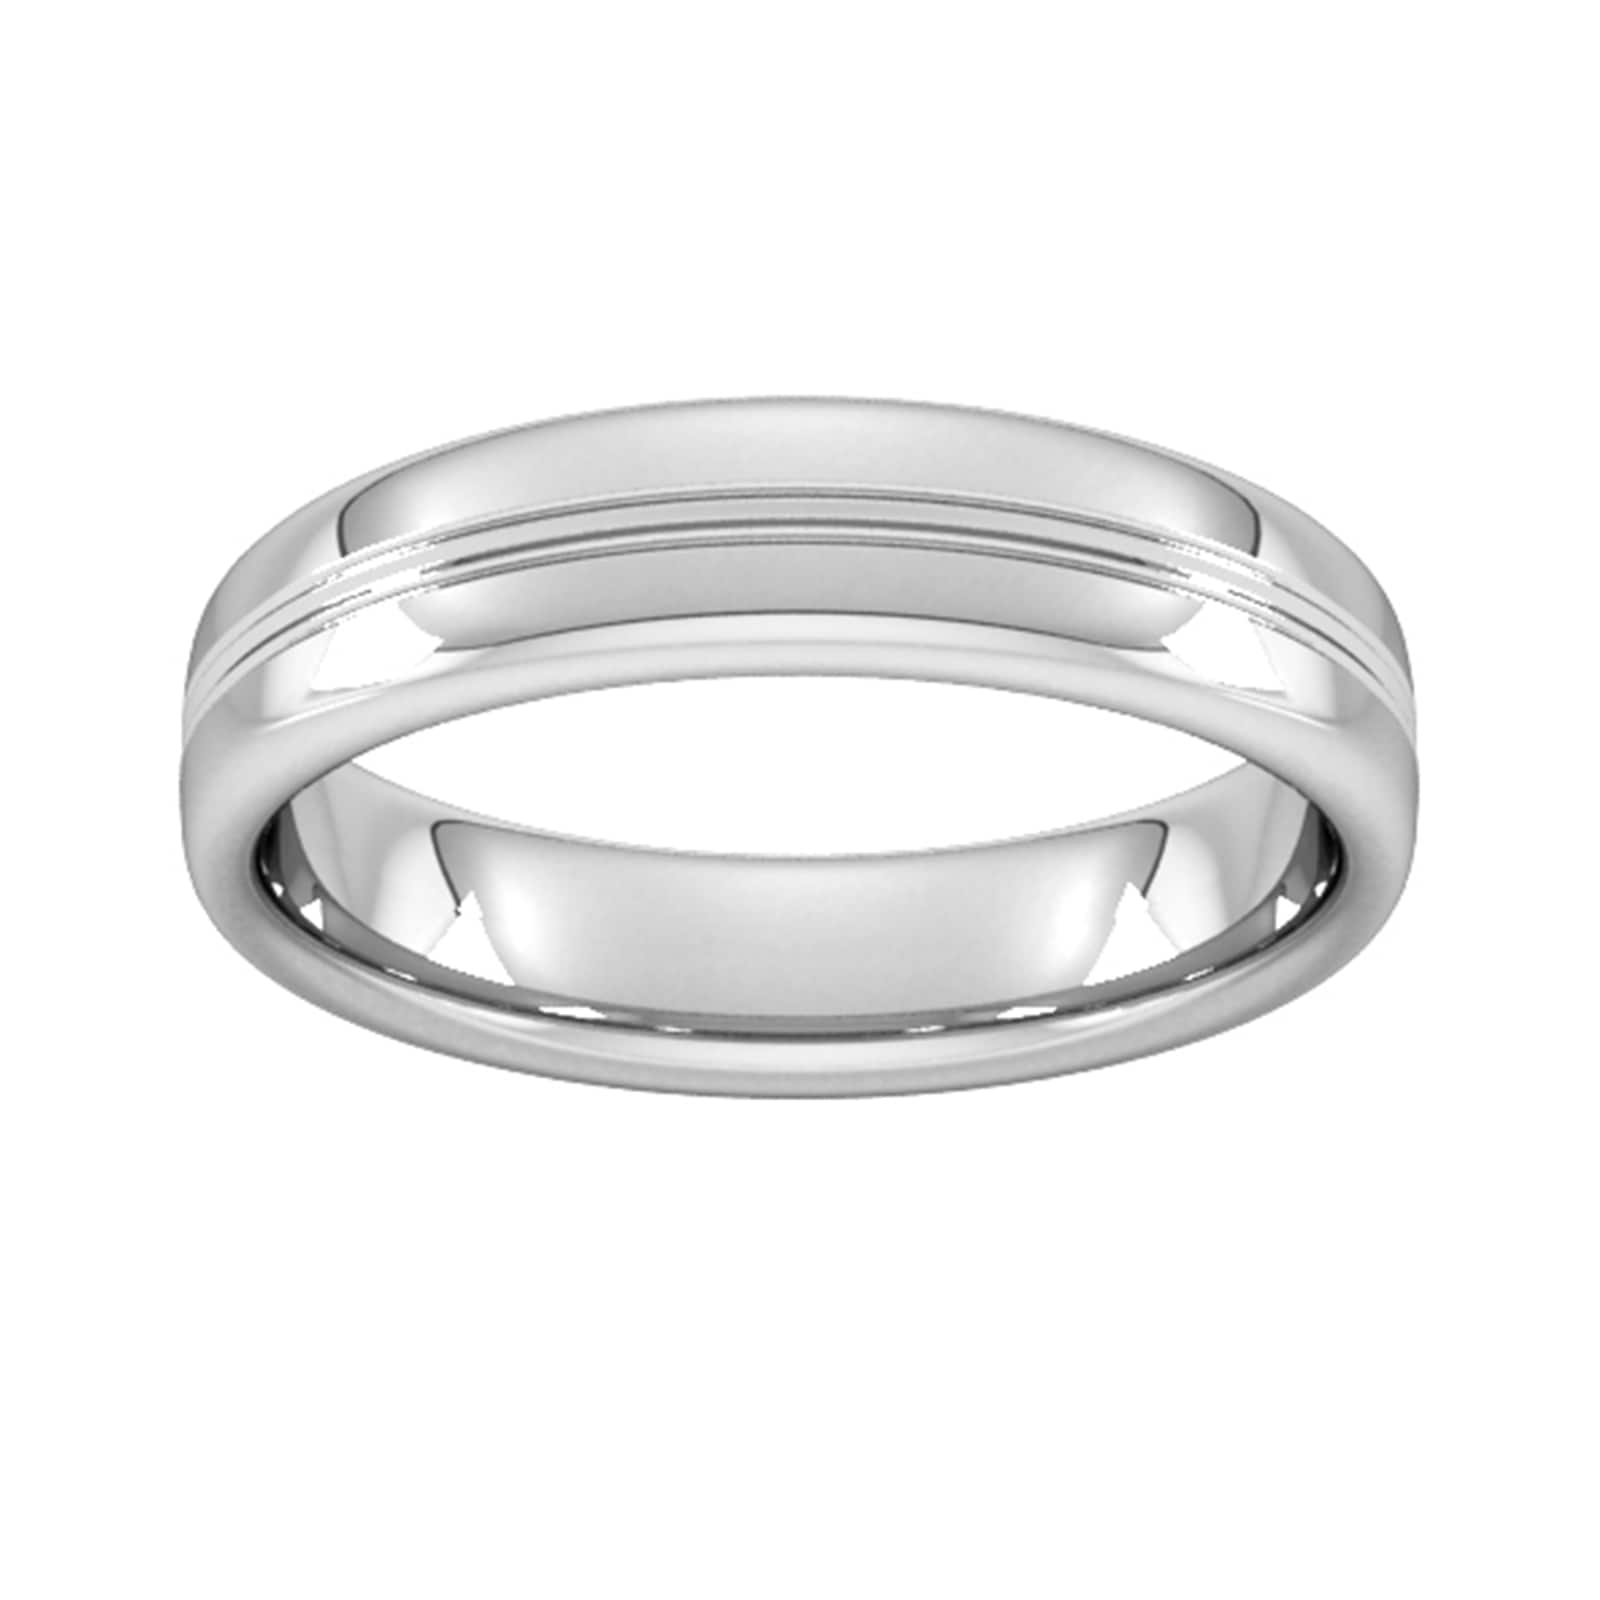 5mm Slight Court Heavy Grooved Polished Finish Wedding Ring In 950 Palladium - Ring Size S